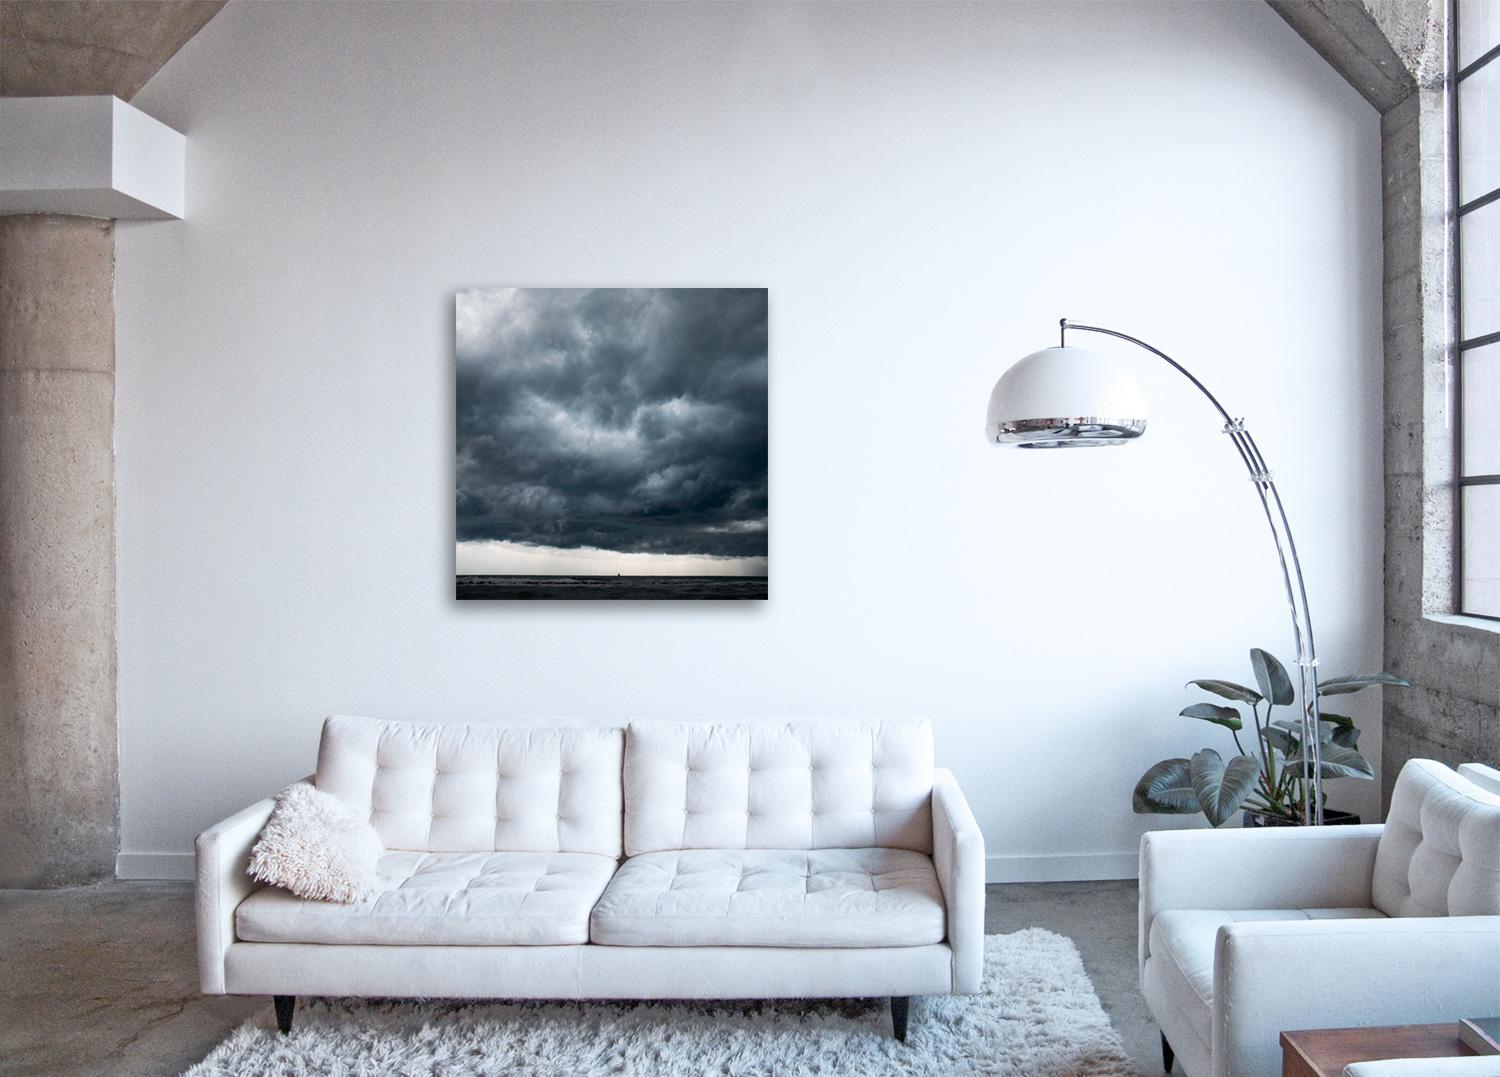 Cloud Study ll - large format photograph of dramatic cloudscape sky - Contemporary Print by Frank Schott